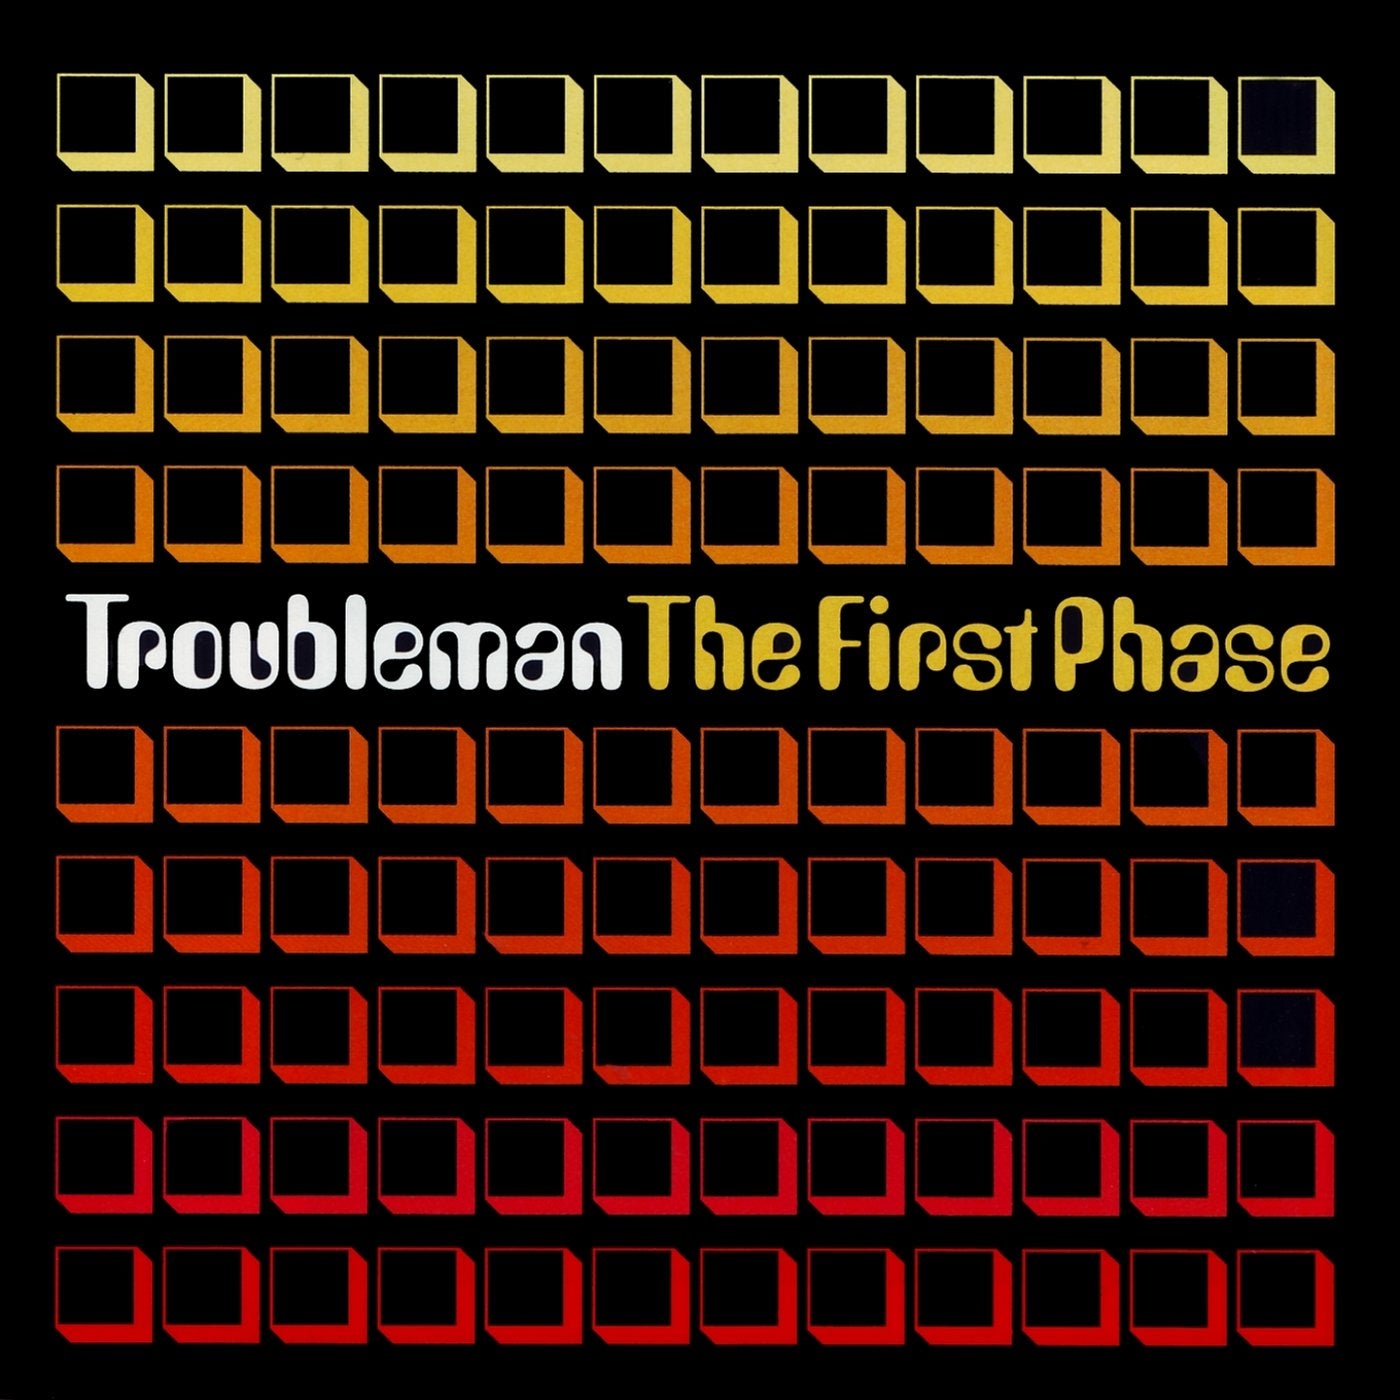 The First Phase